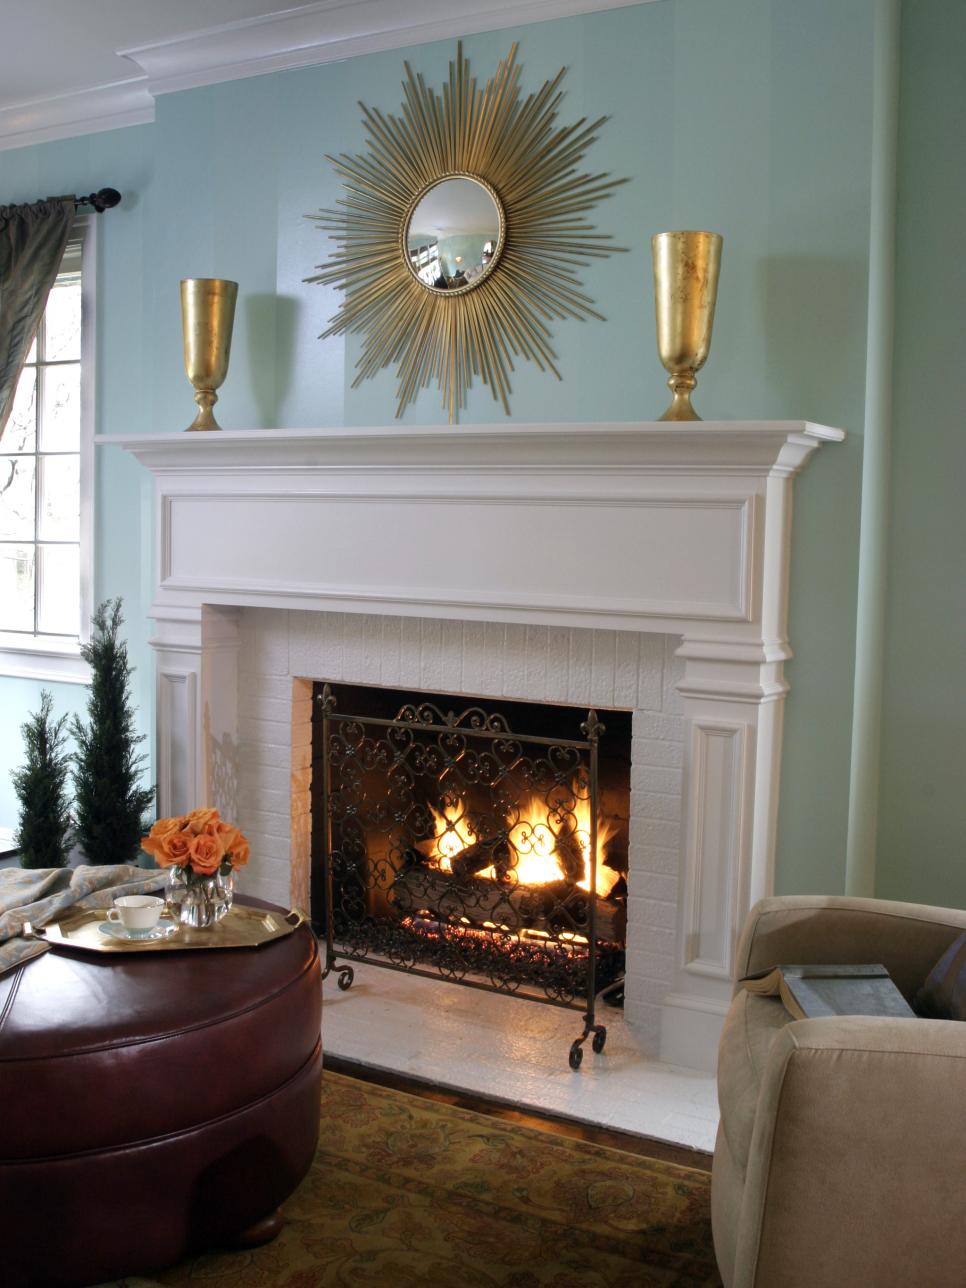 White Brick Fireplace in a Aqua Living Area With Gold Starburst Mirror